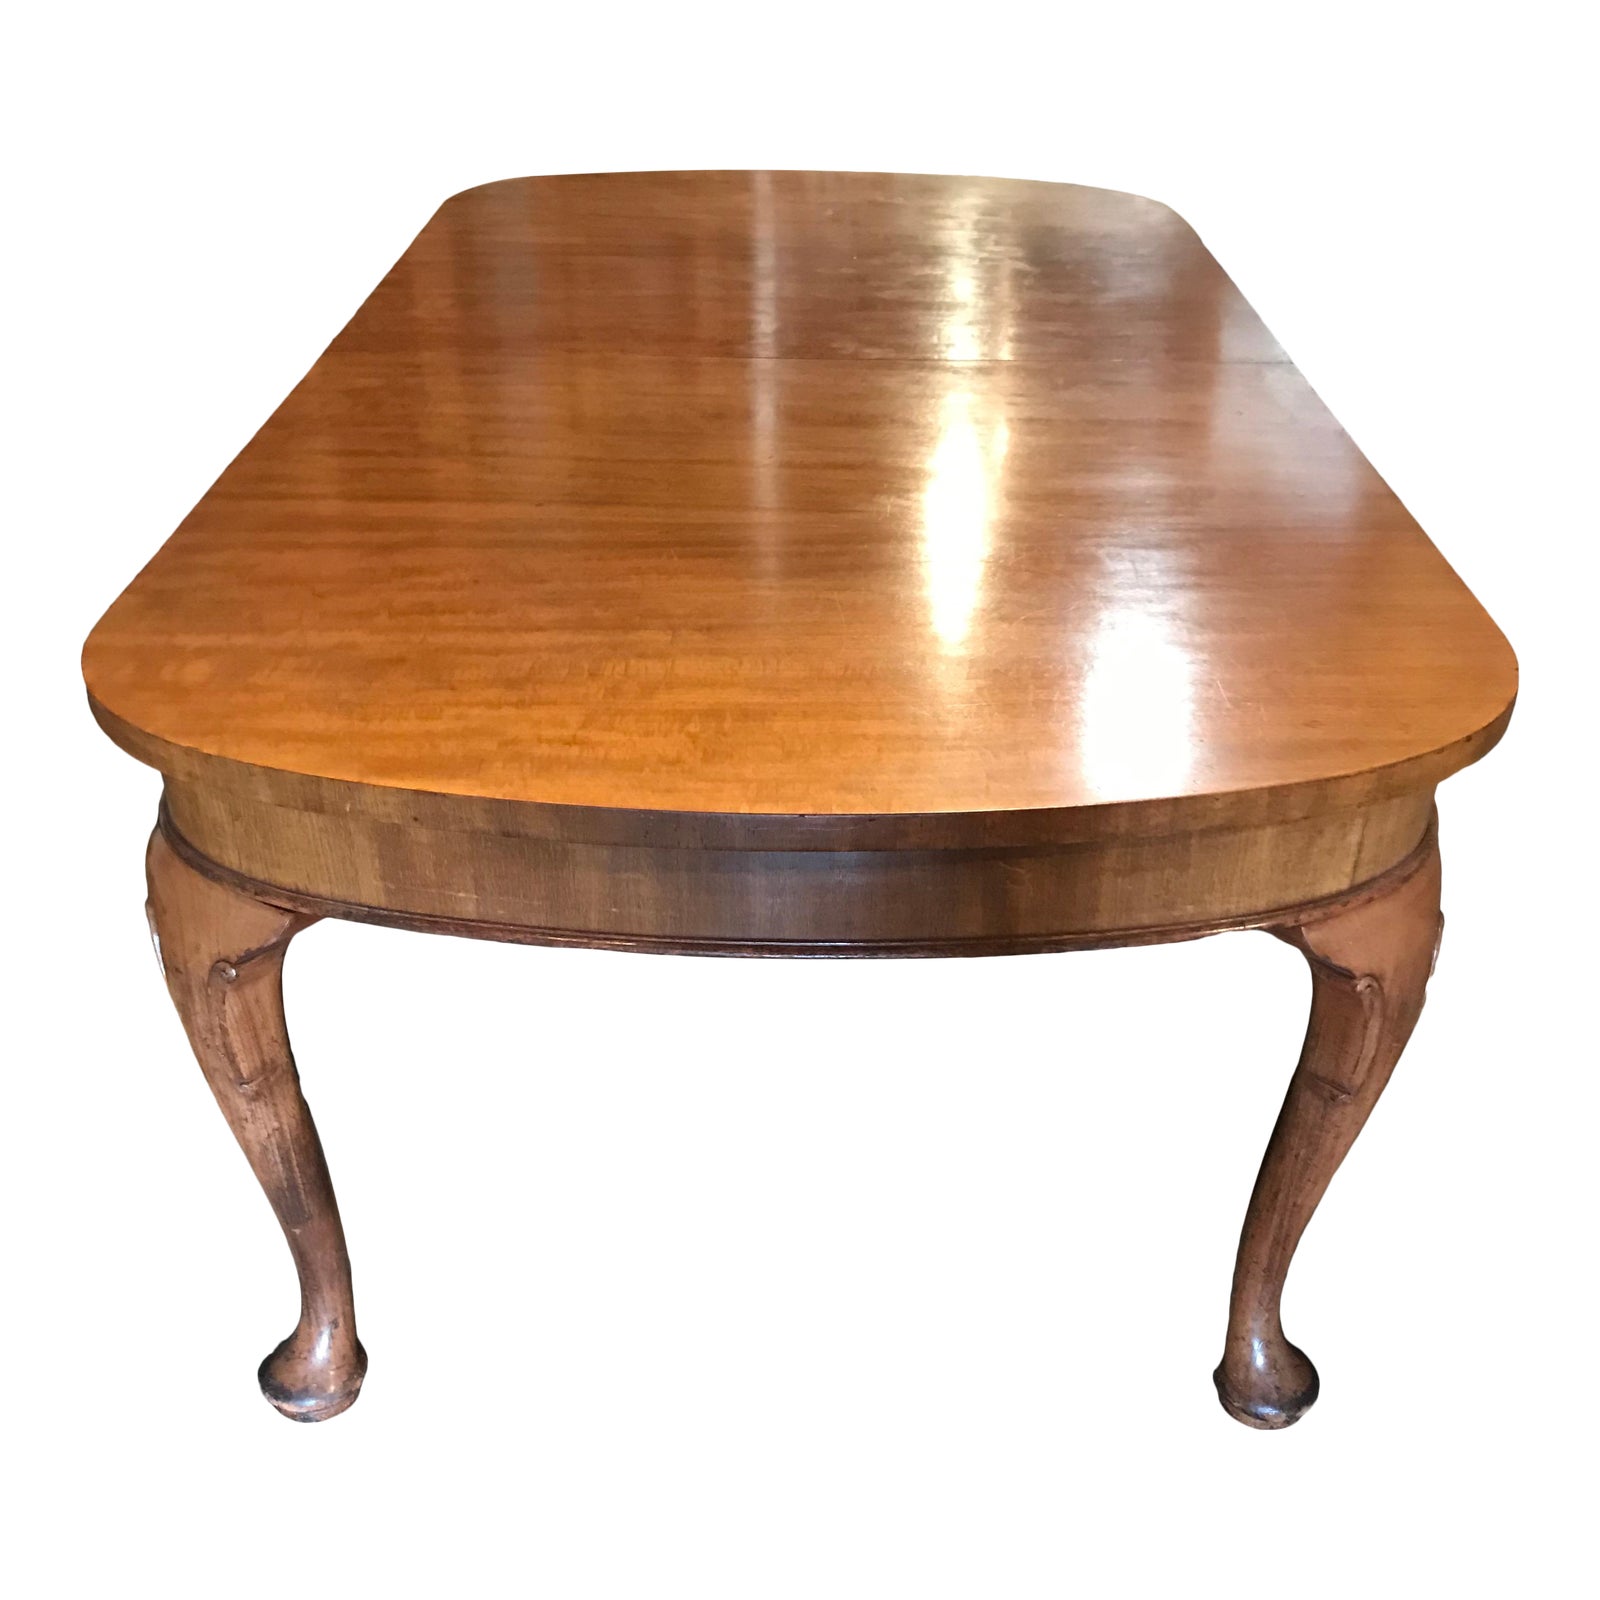 Antique Dining Room Table Kenny Ball, Antique Dining Room Tables